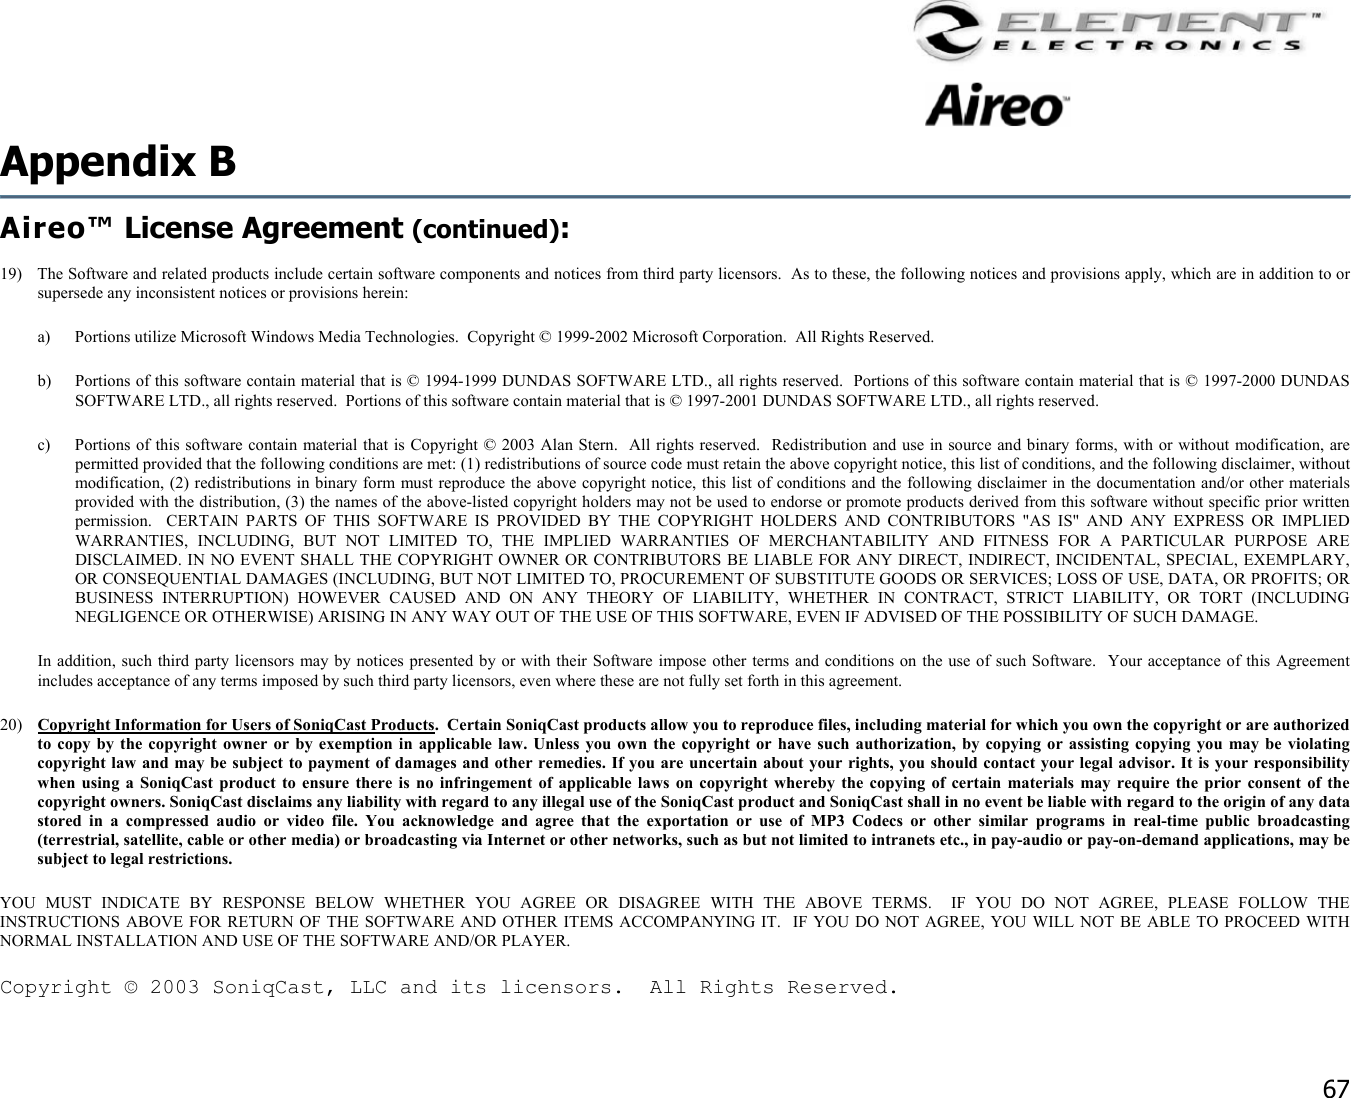                                                                                    67 Appendix B   Aireo™ License Agreement (continued):  19)  The Software and related products include certain software components and notices from third party licensors.  As to these, the following notices and provisions apply, which are in addition to or supersede any inconsistent notices or provisions herein:  a)  Portions utilize Microsoft Windows Media Technologies.  Copyright © 1999-2002 Microsoft Corporation.  All Rights Reserved. b)  Portions of this software contain material that is © 1994-1999 DUNDAS SOFTWARE LTD., all rights reserved.  Portions of this software contain material that is © 1997-2000 DUNDAS SOFTWARE LTD., all rights reserved.  Portions of this software contain material that is © 1997-2001 DUNDAS SOFTWARE LTD., all rights reserved. c)  Portions of this software contain material that is Copyright © 2003 Alan Stern.  All rights reserved.  Redistribution and use in source and binary forms, with or without modification, are permitted provided that the following conditions are met: (1) redistributions of source code must retain the above copyright notice, this list of conditions, and the following disclaimer, without modification, (2) redistributions in binary form must reproduce the above copyright notice, this list of conditions and the following disclaimer in the documentation and/or other materials provided with the distribution, (3) the names of the above-listed copyright holders may not be used to endorse or promote products derived from this software without specific prior written permission.  CERTAIN PARTS OF THIS SOFTWARE IS PROVIDED BY THE COPYRIGHT HOLDERS AND CONTRIBUTORS &quot;AS IS&quot; AND ANY EXPRESS OR IMPLIED WARRANTIES, INCLUDING, BUT NOT LIMITED TO, THE IMPLIED WARRANTIES OF MERCHANTABILITY AND FITNESS FOR A PARTICULAR PURPOSE ARE DISCLAIMED. IN NO EVENT SHALL THE COPYRIGHT OWNER OR CONTRIBUTORS BE LIABLE FOR ANY DIRECT, INDIRECT, INCIDENTAL, SPECIAL, EXEMPLARY, OR CONSEQUENTIAL DAMAGES (INCLUDING, BUT NOT LIMITED TO, PROCUREMENT OF SUBSTITUTE GOODS OR SERVICES; LOSS OF USE, DATA, OR PROFITS; OR BUSINESS INTERRUPTION) HOWEVER CAUSED AND ON ANY THEORY OF LIABILITY, WHETHER IN CONTRACT, STRICT LIABILITY, OR TORT (INCLUDING NEGLIGENCE OR OTHERWISE) ARISING IN ANY WAY OUT OF THE USE OF THIS SOFTWARE, EVEN IF ADVISED OF THE POSSIBILITY OF SUCH DAMAGE.  In addition, such third party licensors may by notices presented by or with their Software impose other terms and conditions on the use of such Software.  Your acceptance of this Agreement includes acceptance of any terms imposed by such third party licensors, even where these are not fully set forth in this agreement. 20)  Copyright Information for Users of SoniqCast Products.  Certain SoniqCast products allow you to reproduce files, including material for which you own the copyright or are authorized to copy by the copyright owner or by exemption in applicable law. Unless you own the copyright or have such authorization, by copying or assisting copying you may be violating copyright law and may be subject to payment of damages and other remedies. If you are uncertain about your rights, you should contact your legal advisor. It is your responsibility when using a SoniqCast product to ensure there is no infringement of applicable laws on copyright whereby the copying of certain materials may require the prior consent of the copyright owners. SoniqCast disclaims any liability with regard to any illegal use of the SoniqCast product and SoniqCast shall in no event be liable with regard to the origin of any data stored in a compressed audio or video file. You acknowledge and agree that the exportation or use of MP3 Codecs or other similar programs in real-time public broadcasting (terrestrial, satellite, cable or other media) or broadcasting via Internet or other networks, such as but not limited to intranets etc., in pay-audio or pay-on-demand applications, may be subject to legal restrictions. YOU MUST INDICATE BY RESPONSE BELOW WHETHER YOU AGREE OR DISAGREE WITH THE ABOVE TERMS.  IF YOU DO NOT AGREE, PLEASE FOLLOW THE INSTRUCTIONS ABOVE FOR RETURN OF THE SOFTWARE AND OTHER ITEMS ACCOMPANYING IT.  IF YOU DO NOT AGREE, YOU WILL NOT BE ABLE TO PROCEED WITH NORMAL INSTALLATION AND USE OF THE SOFTWARE AND/OR PLAYER. Copyright © 2003 SoniqCast, LLC and its licensors.  All Rights Reserved. 